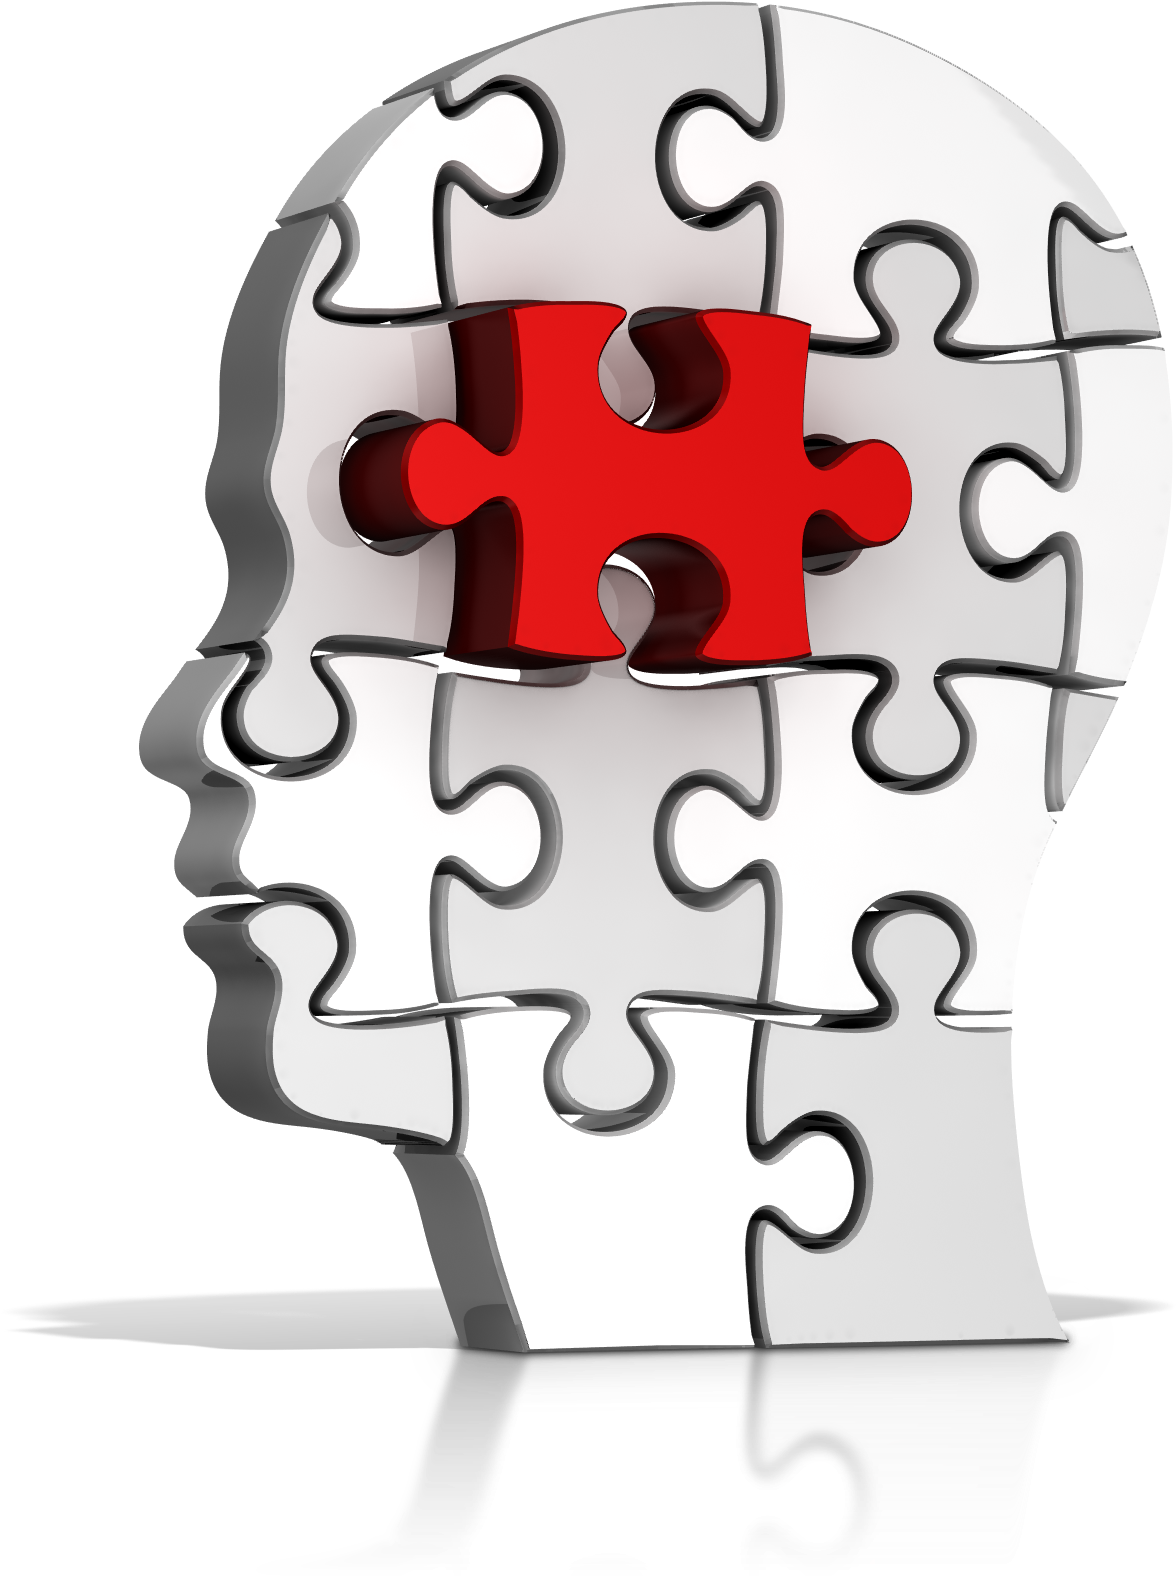 A Puzzle Piece In A Head Shape